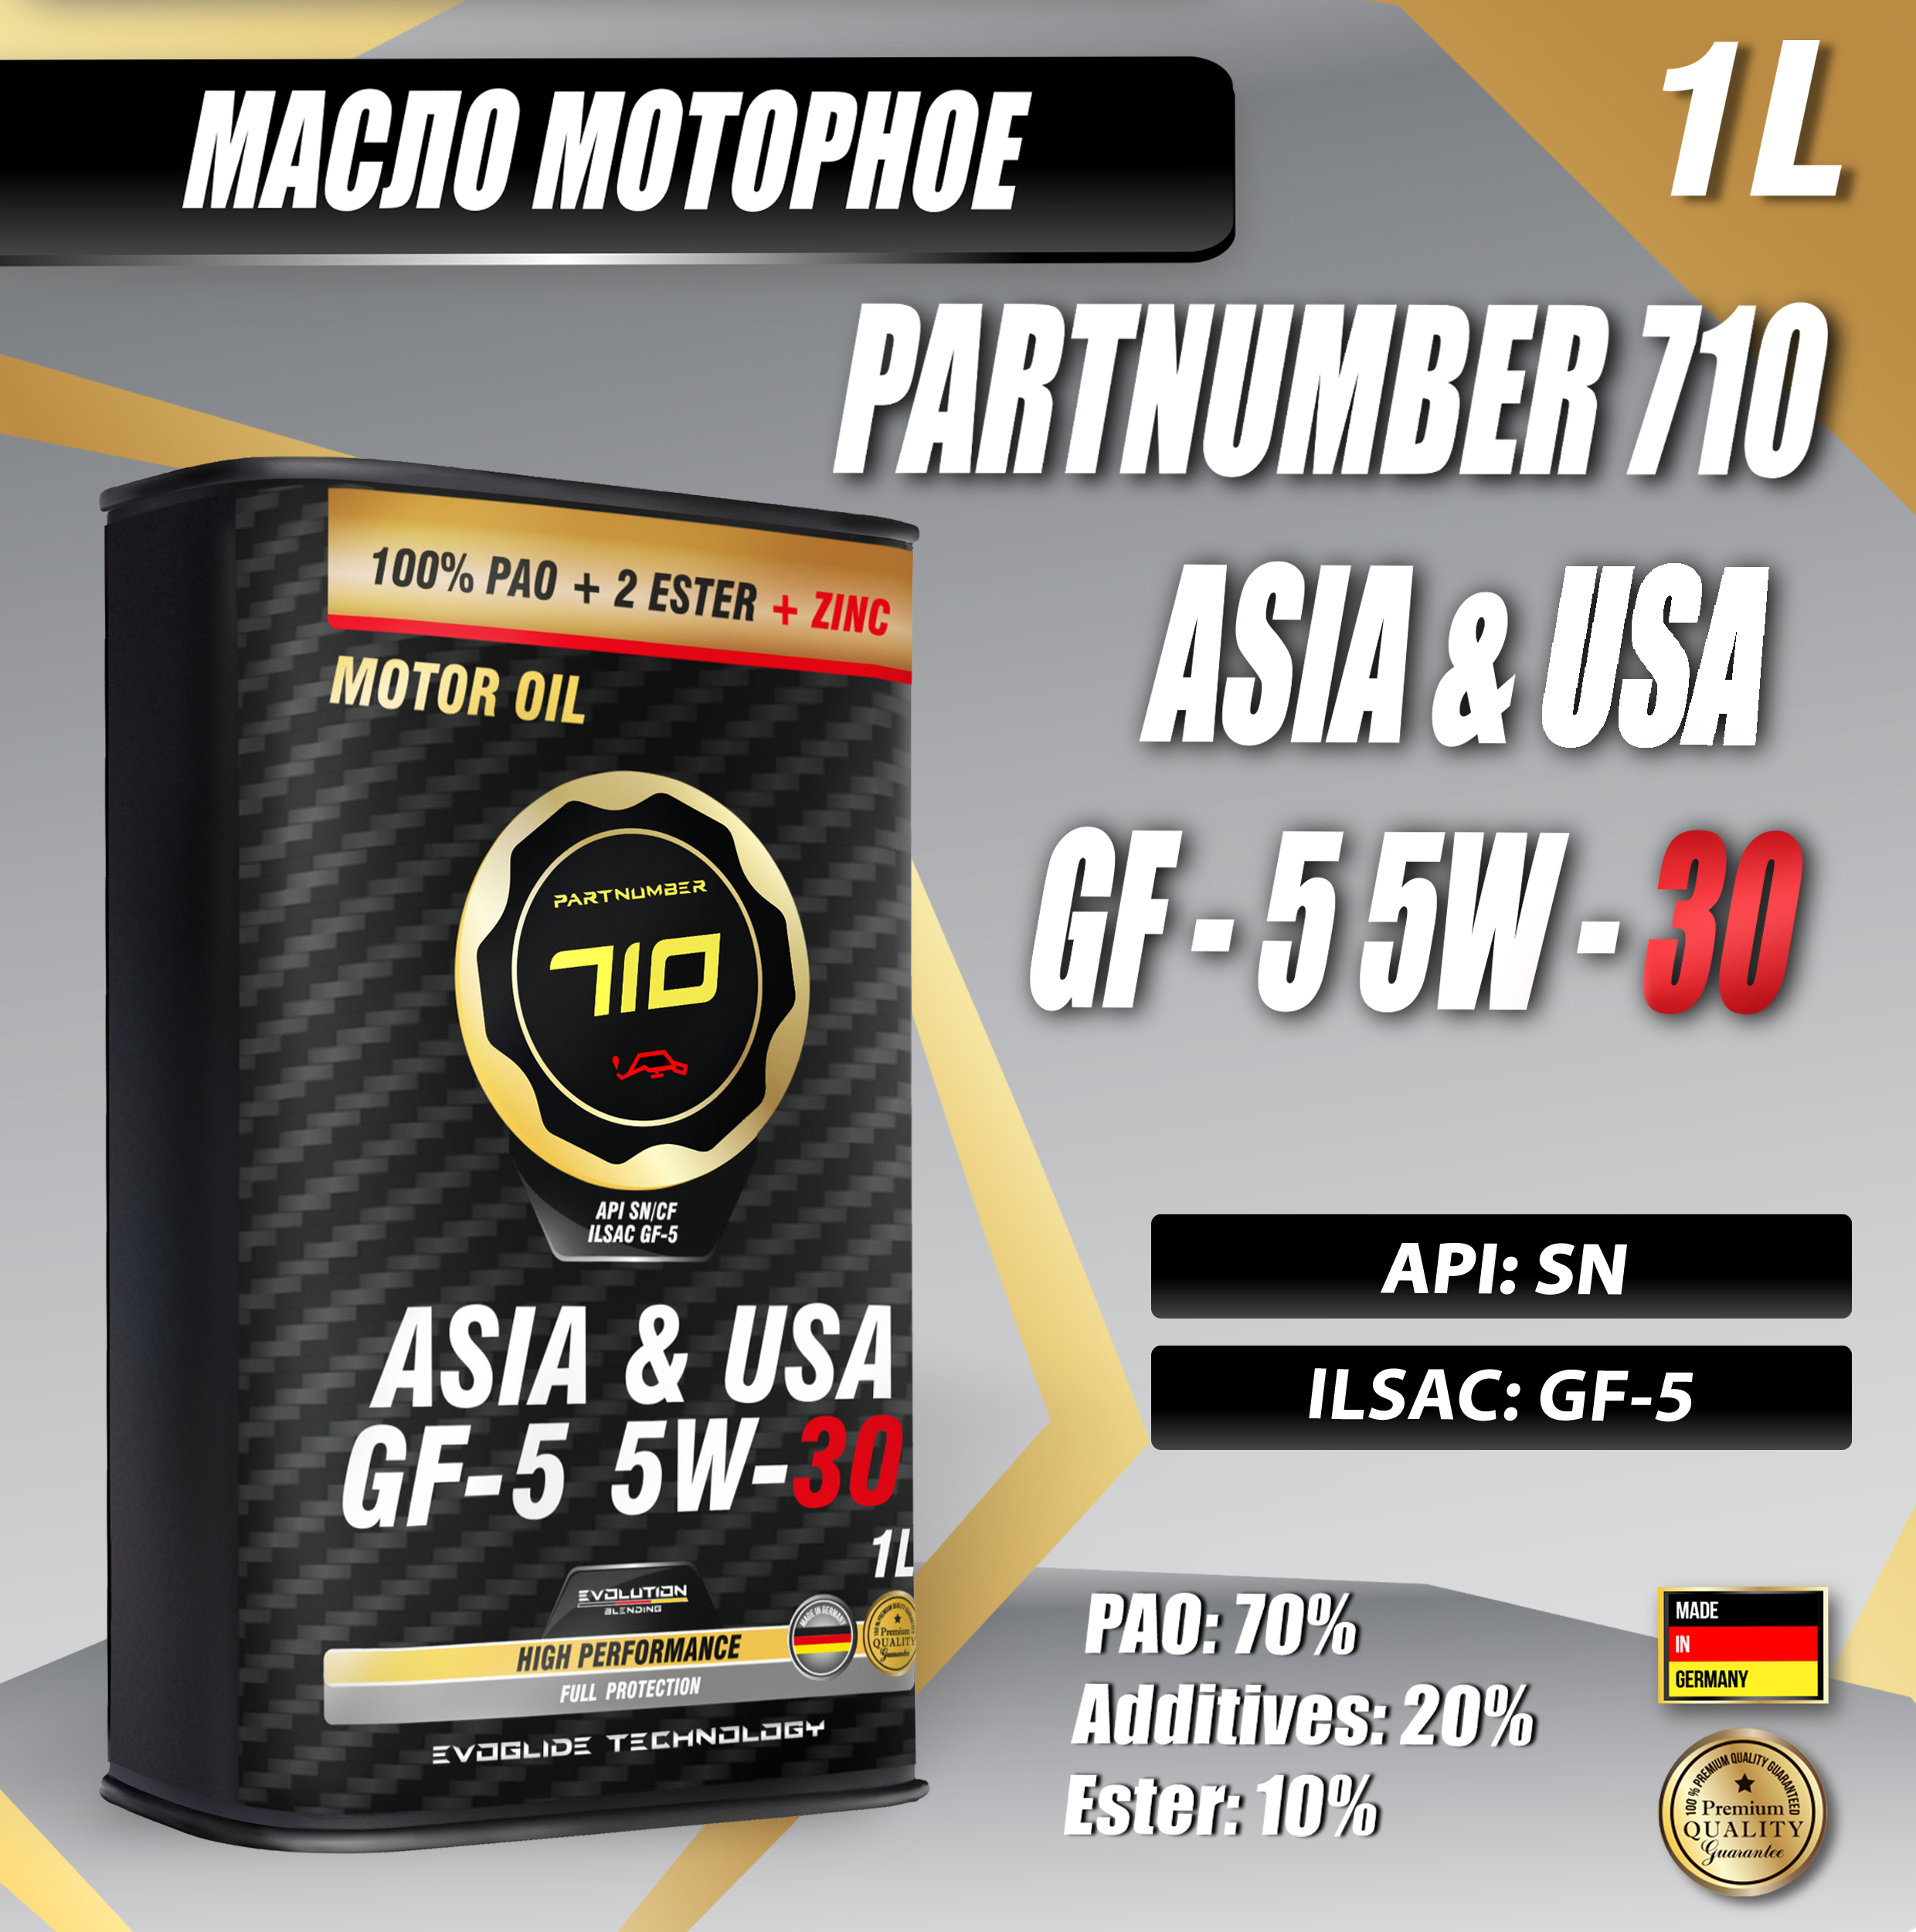 Масло моторное PARTNUMBER 710 Asia & USA GF-5 5W-30 1л